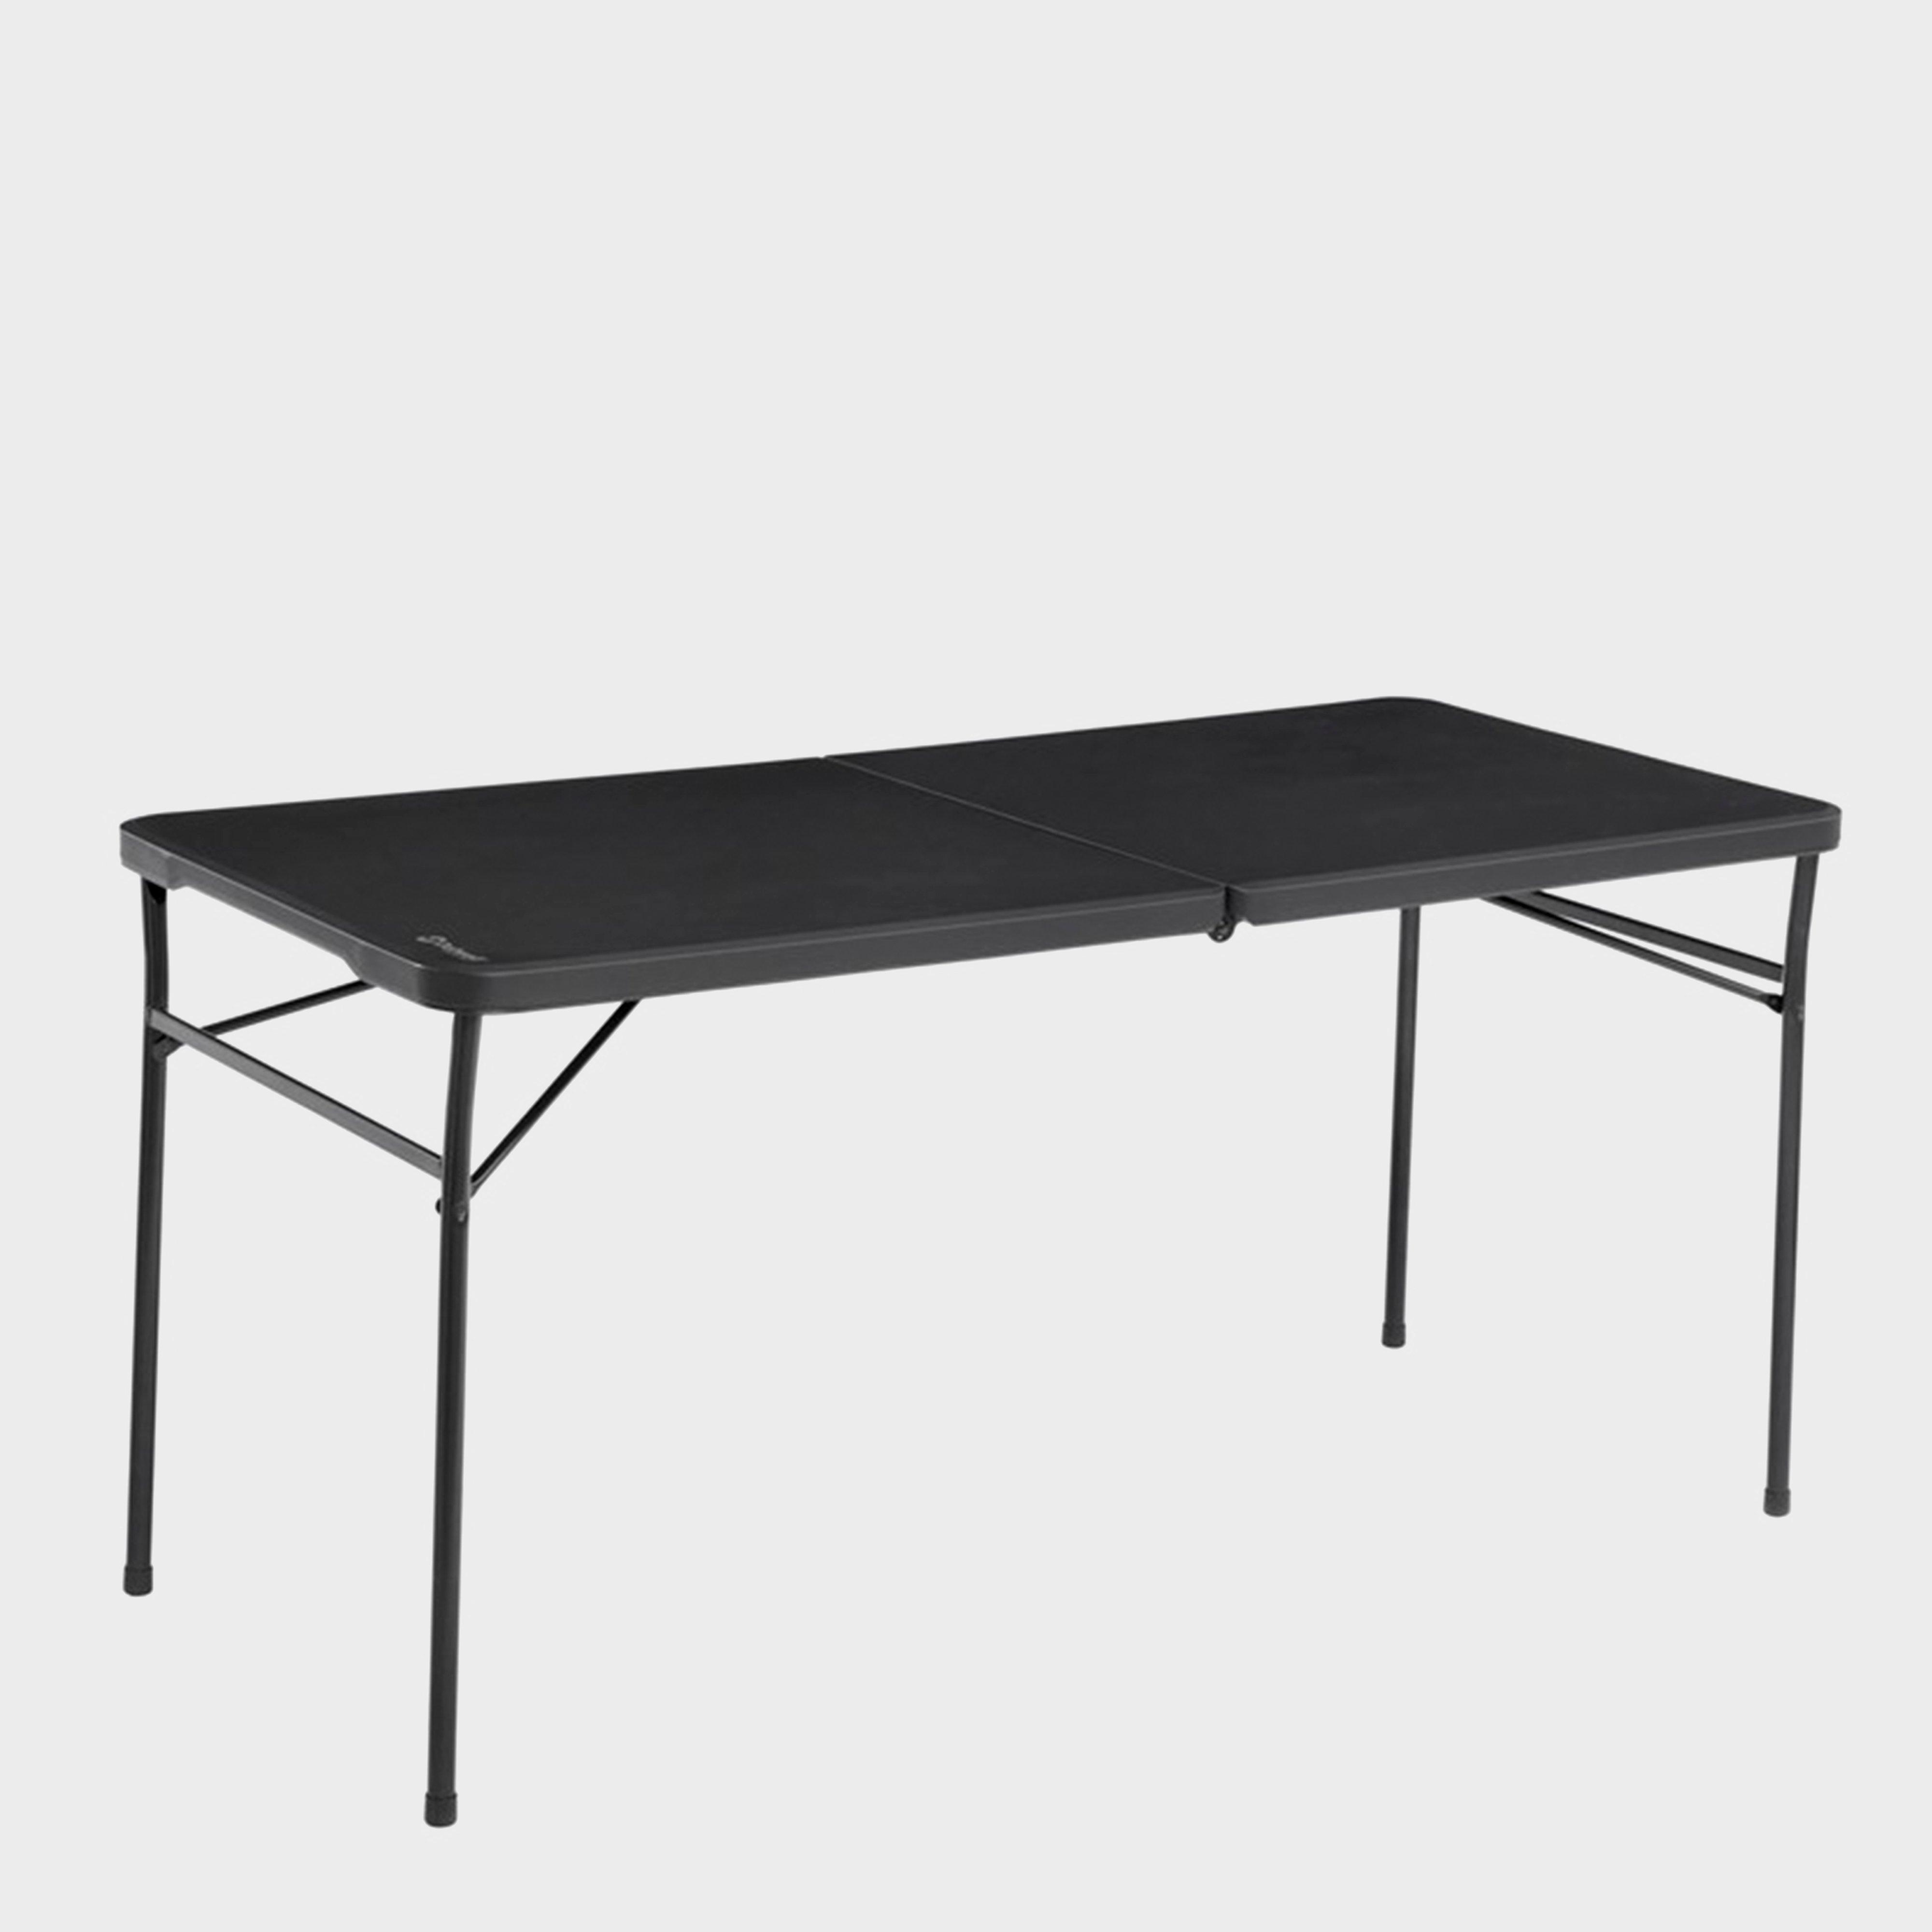 New Outwell Claros Large Picnic Table Camping Furniture